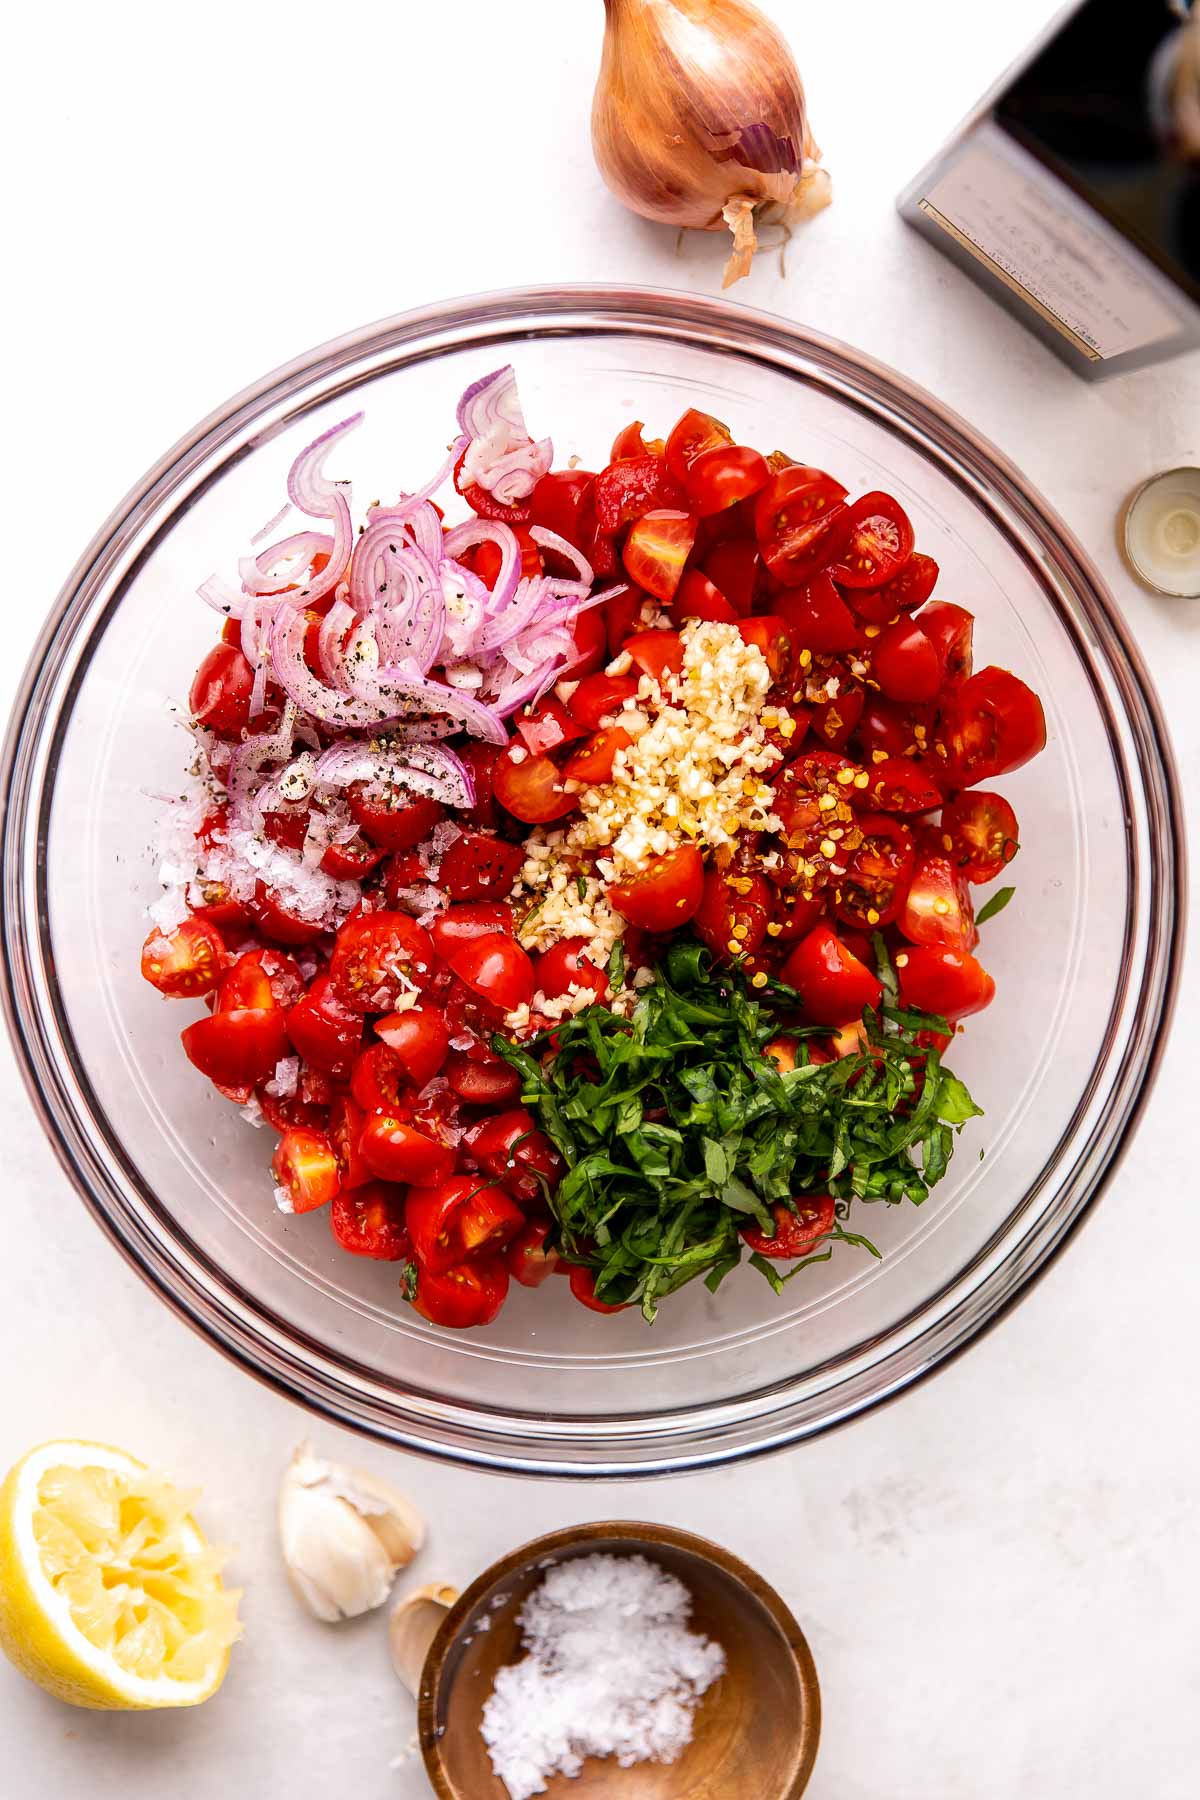 An overhead shot of a clear glass bowl of quartered cherry tomatoes, finely sliced shallot, finely chopped garlic, finely sliced fresh basil, crushed red pepper flakes, and lemon juice sits atop a creamy white textured surface. Extra virgin olive oil has been poured over top of the tomato mixture to allow the tomatoes to marinate. A full shallot, a bottle of DeLallo extra virgin olive oil, a small pinch bowl filled with kosher salt, a couple of cloves of garlic, and a half of a lemon surround the mixing bowl at center.